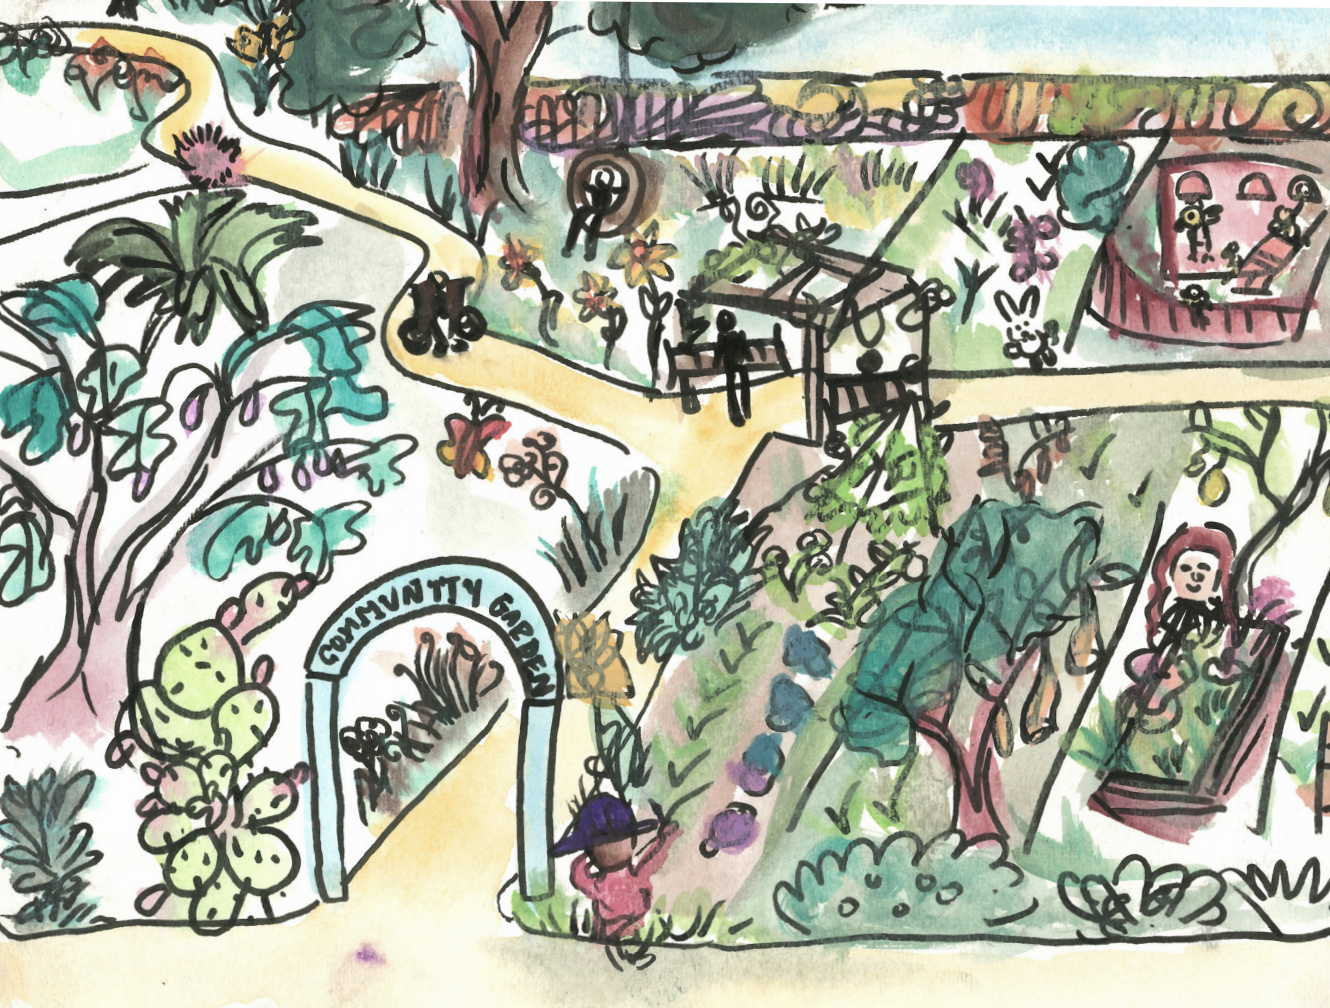 a drawing of a garden with trees and plants